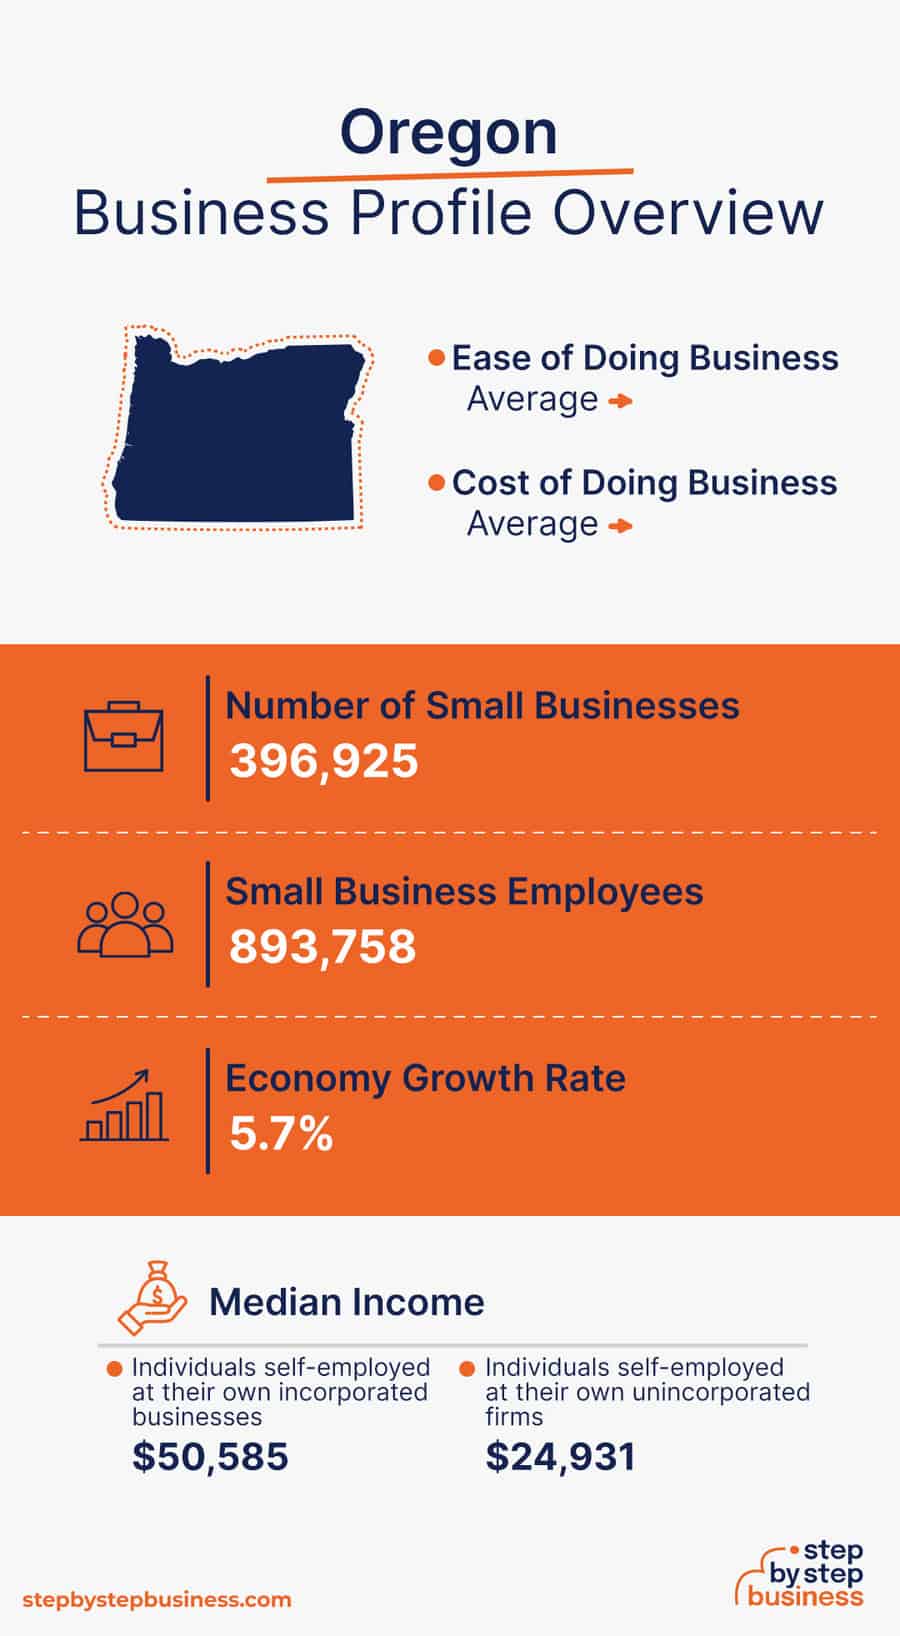 Oregon Business Profile Overview